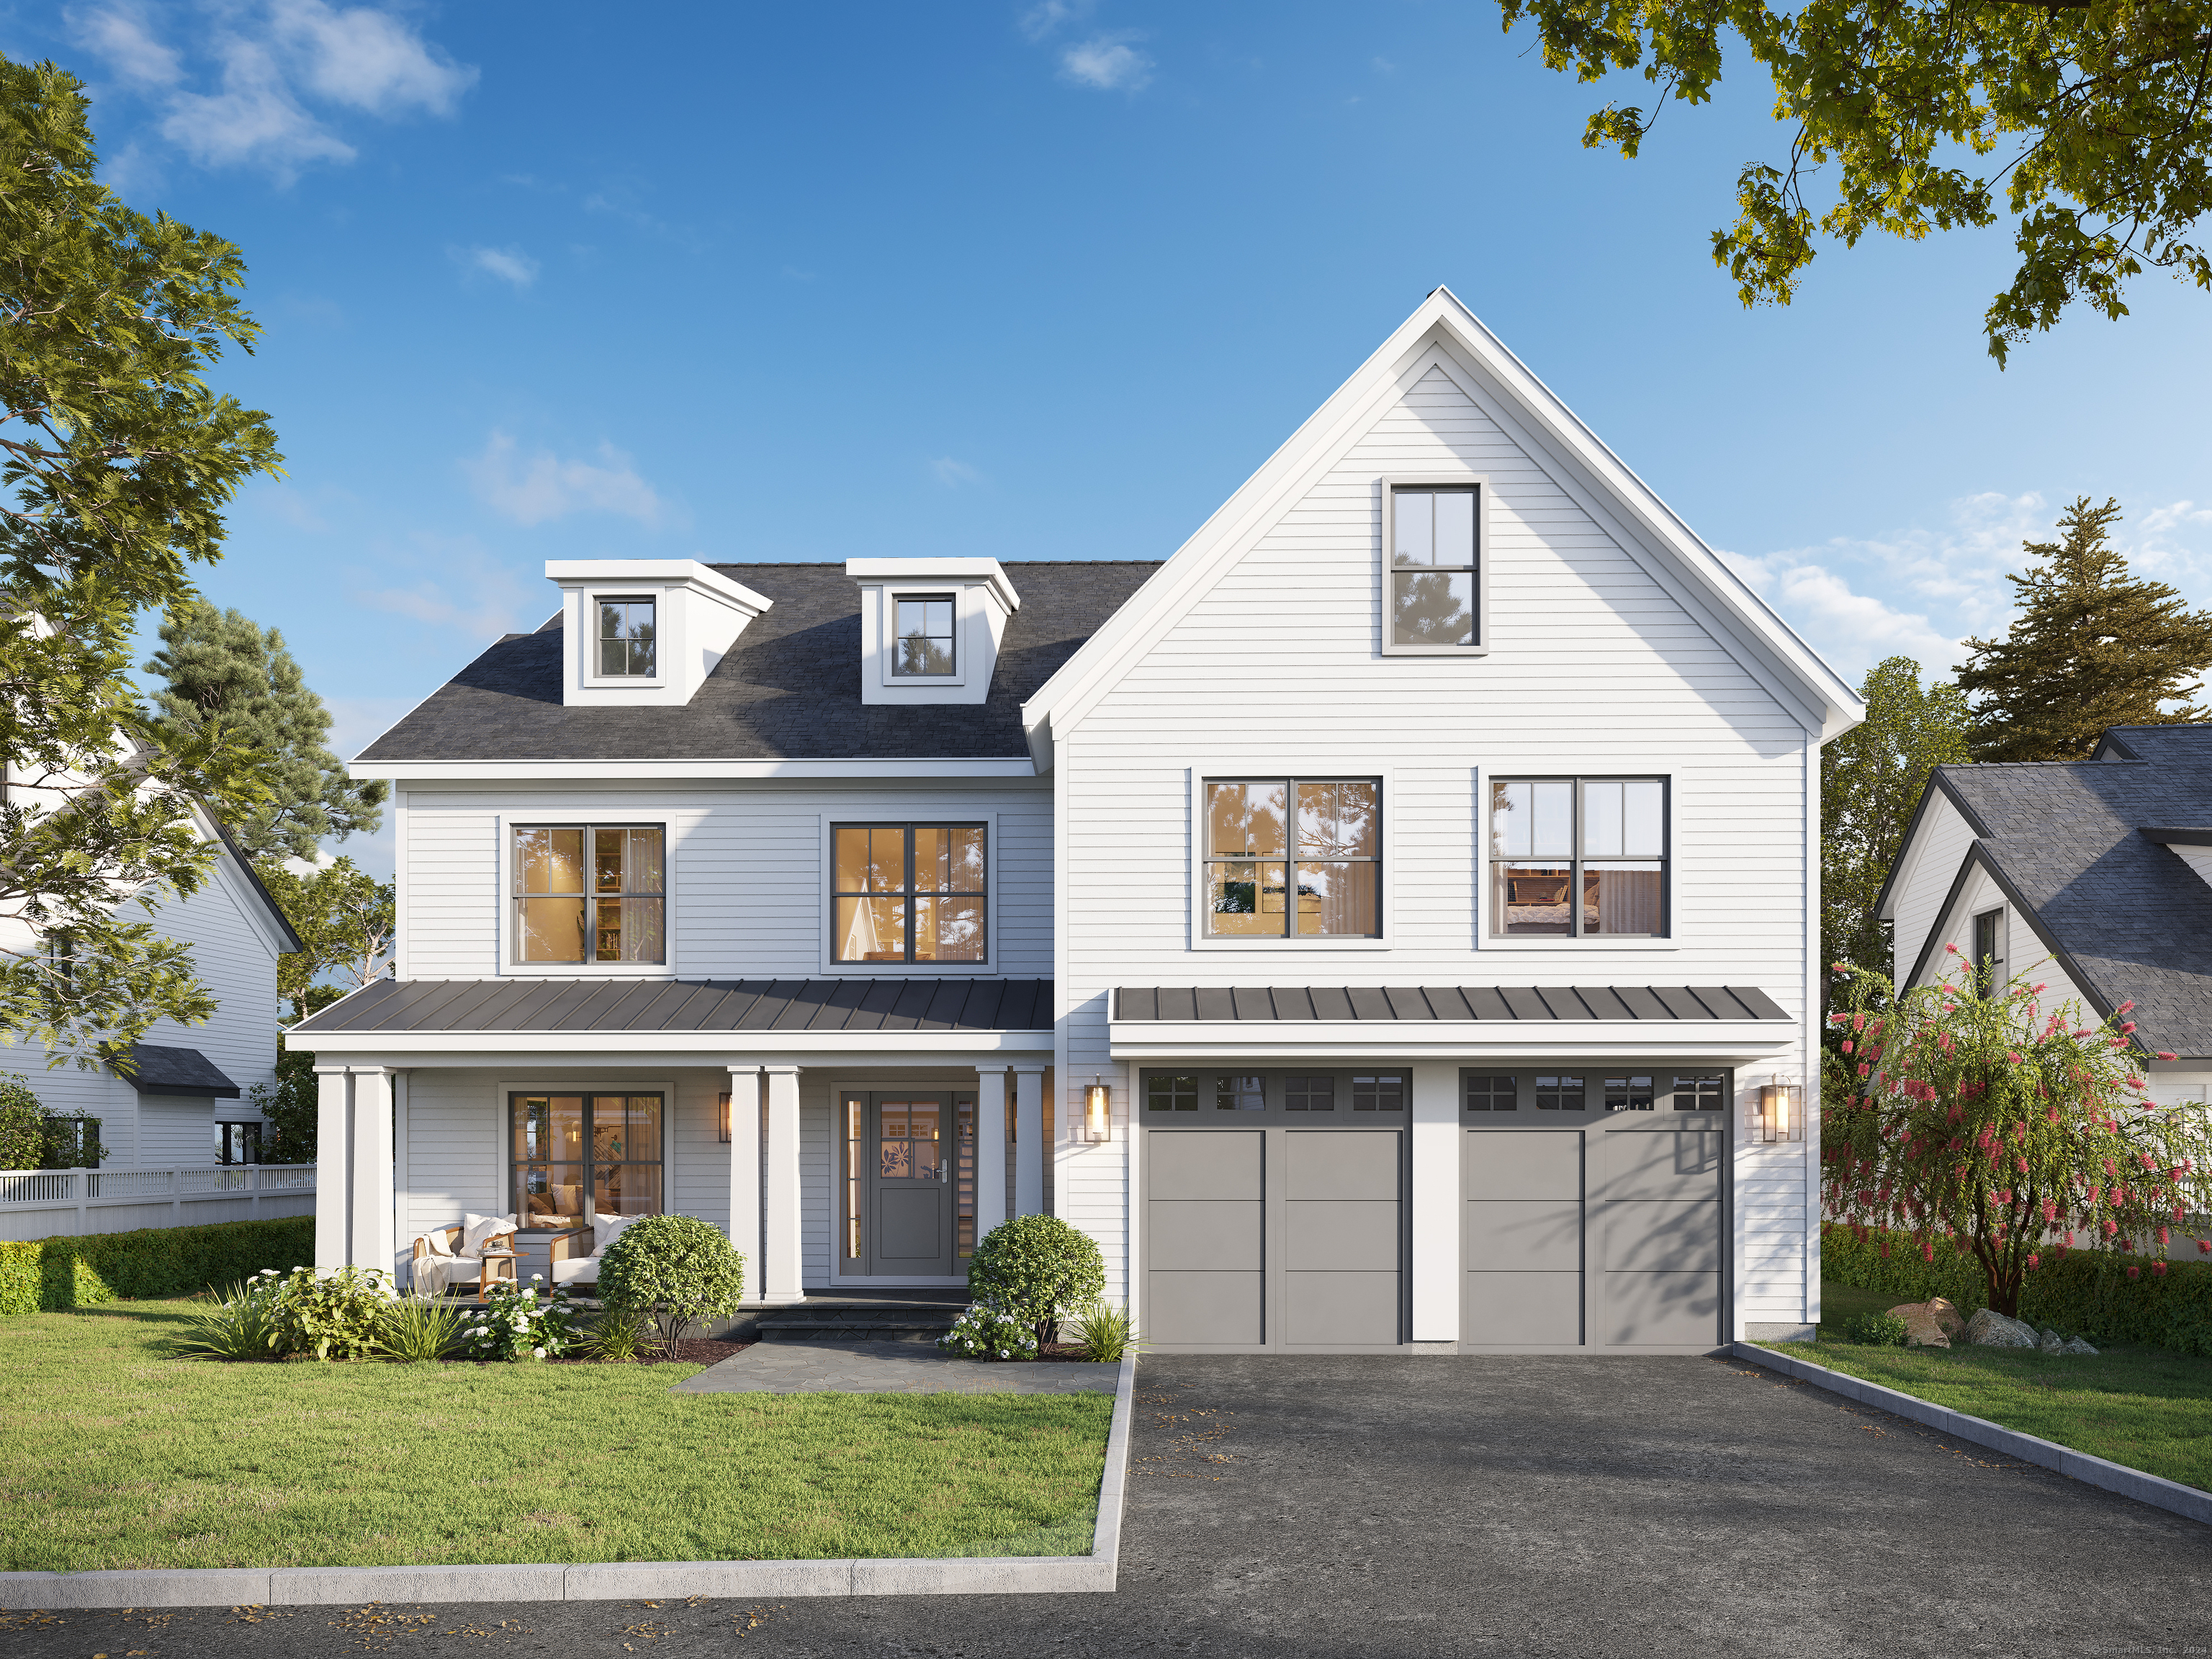 10 The Reserve At Sterling Ridge, Stamford, Connecticut - 5 Bedrooms  
5 Bathrooms  
9 Rooms - 